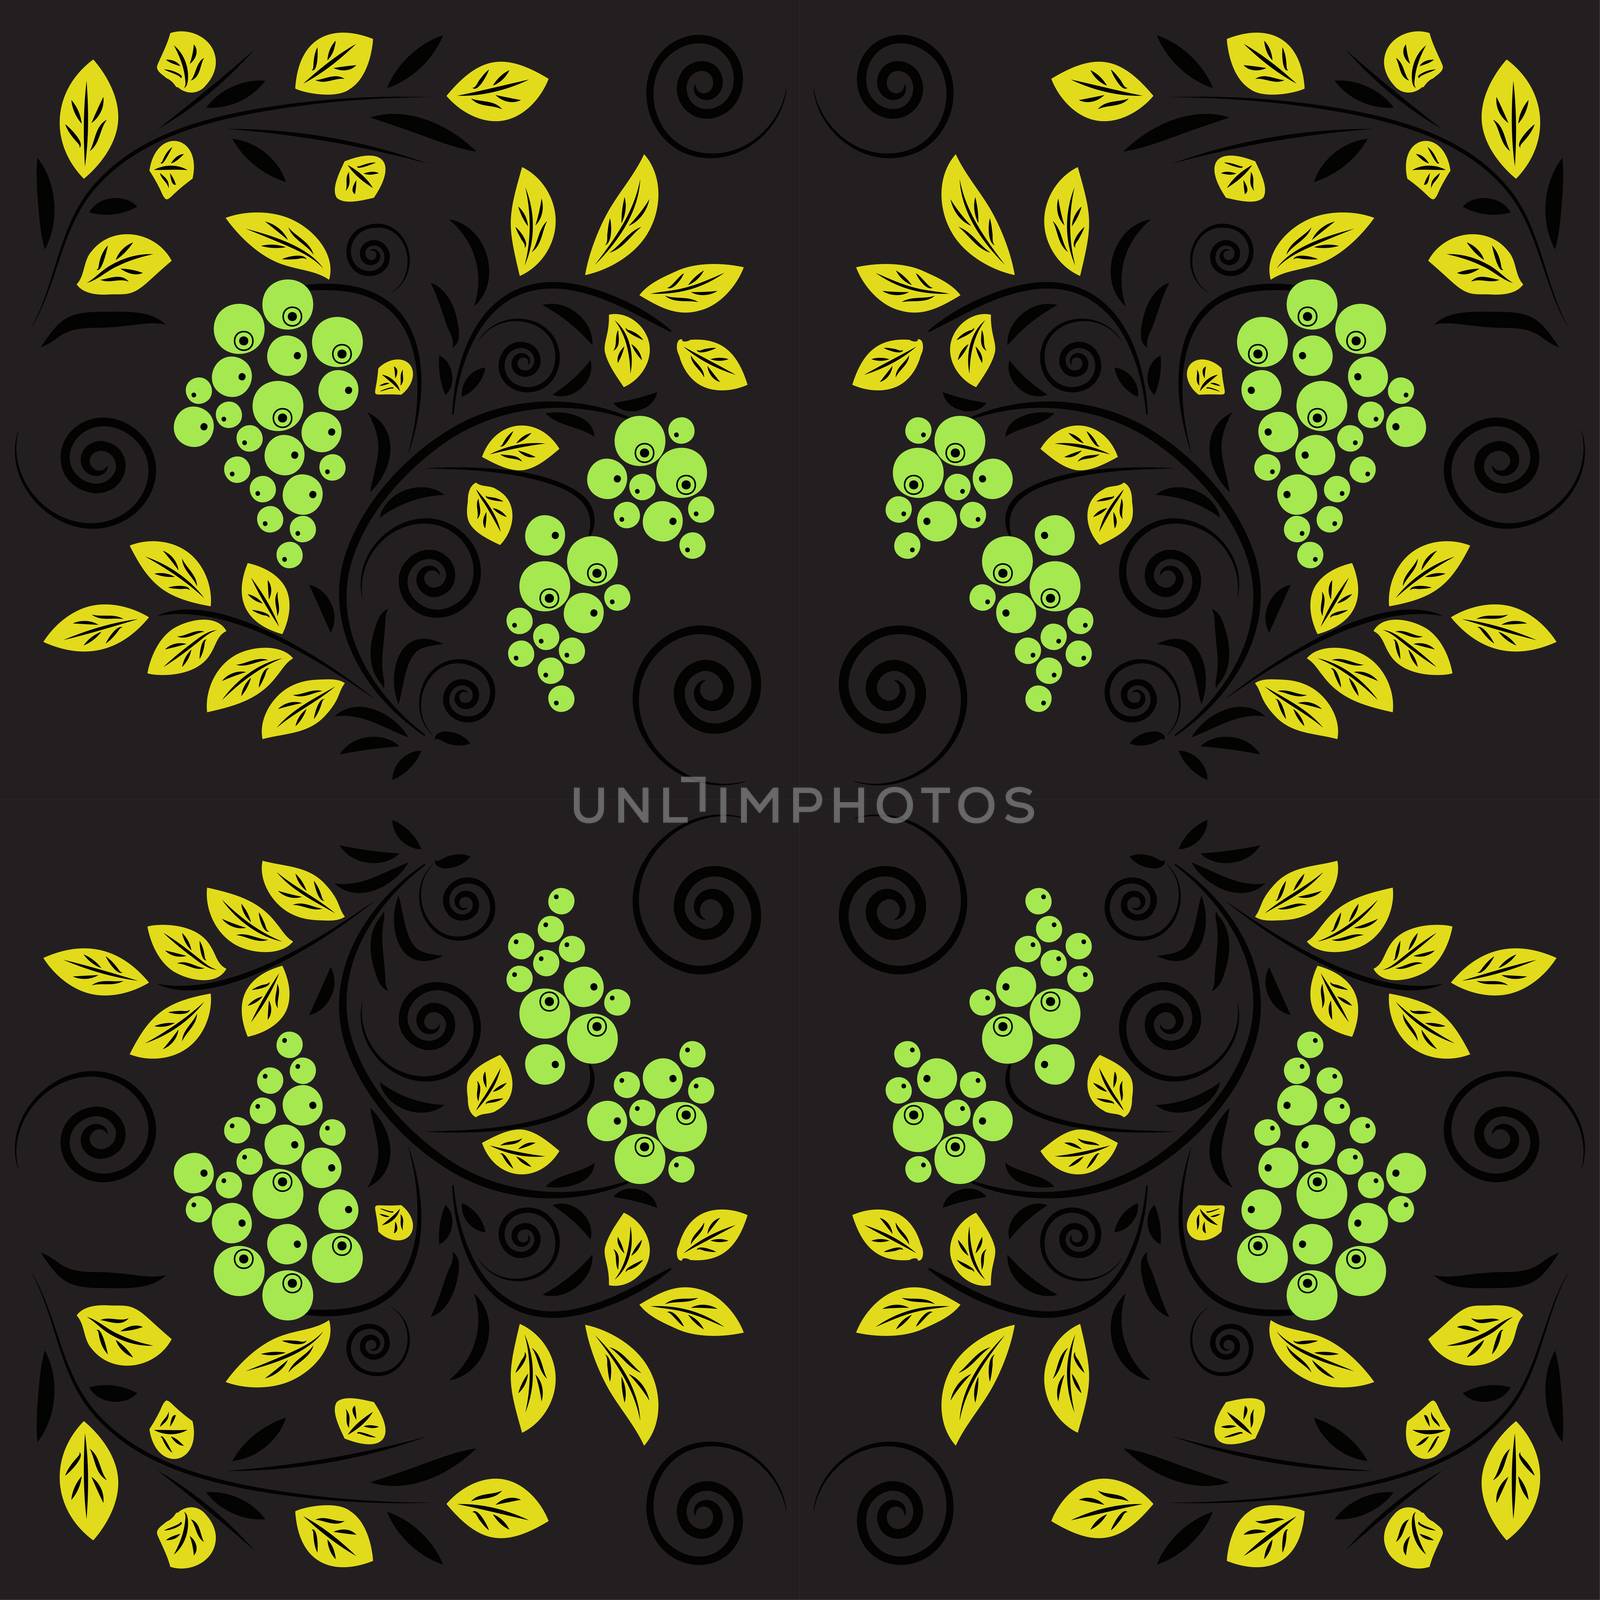 Seamless floral pattern with ornamental flowers in Khokhloma style. Floral design. Traditional russian Hohloma ornament with flowers in bright colors. Vector illustration